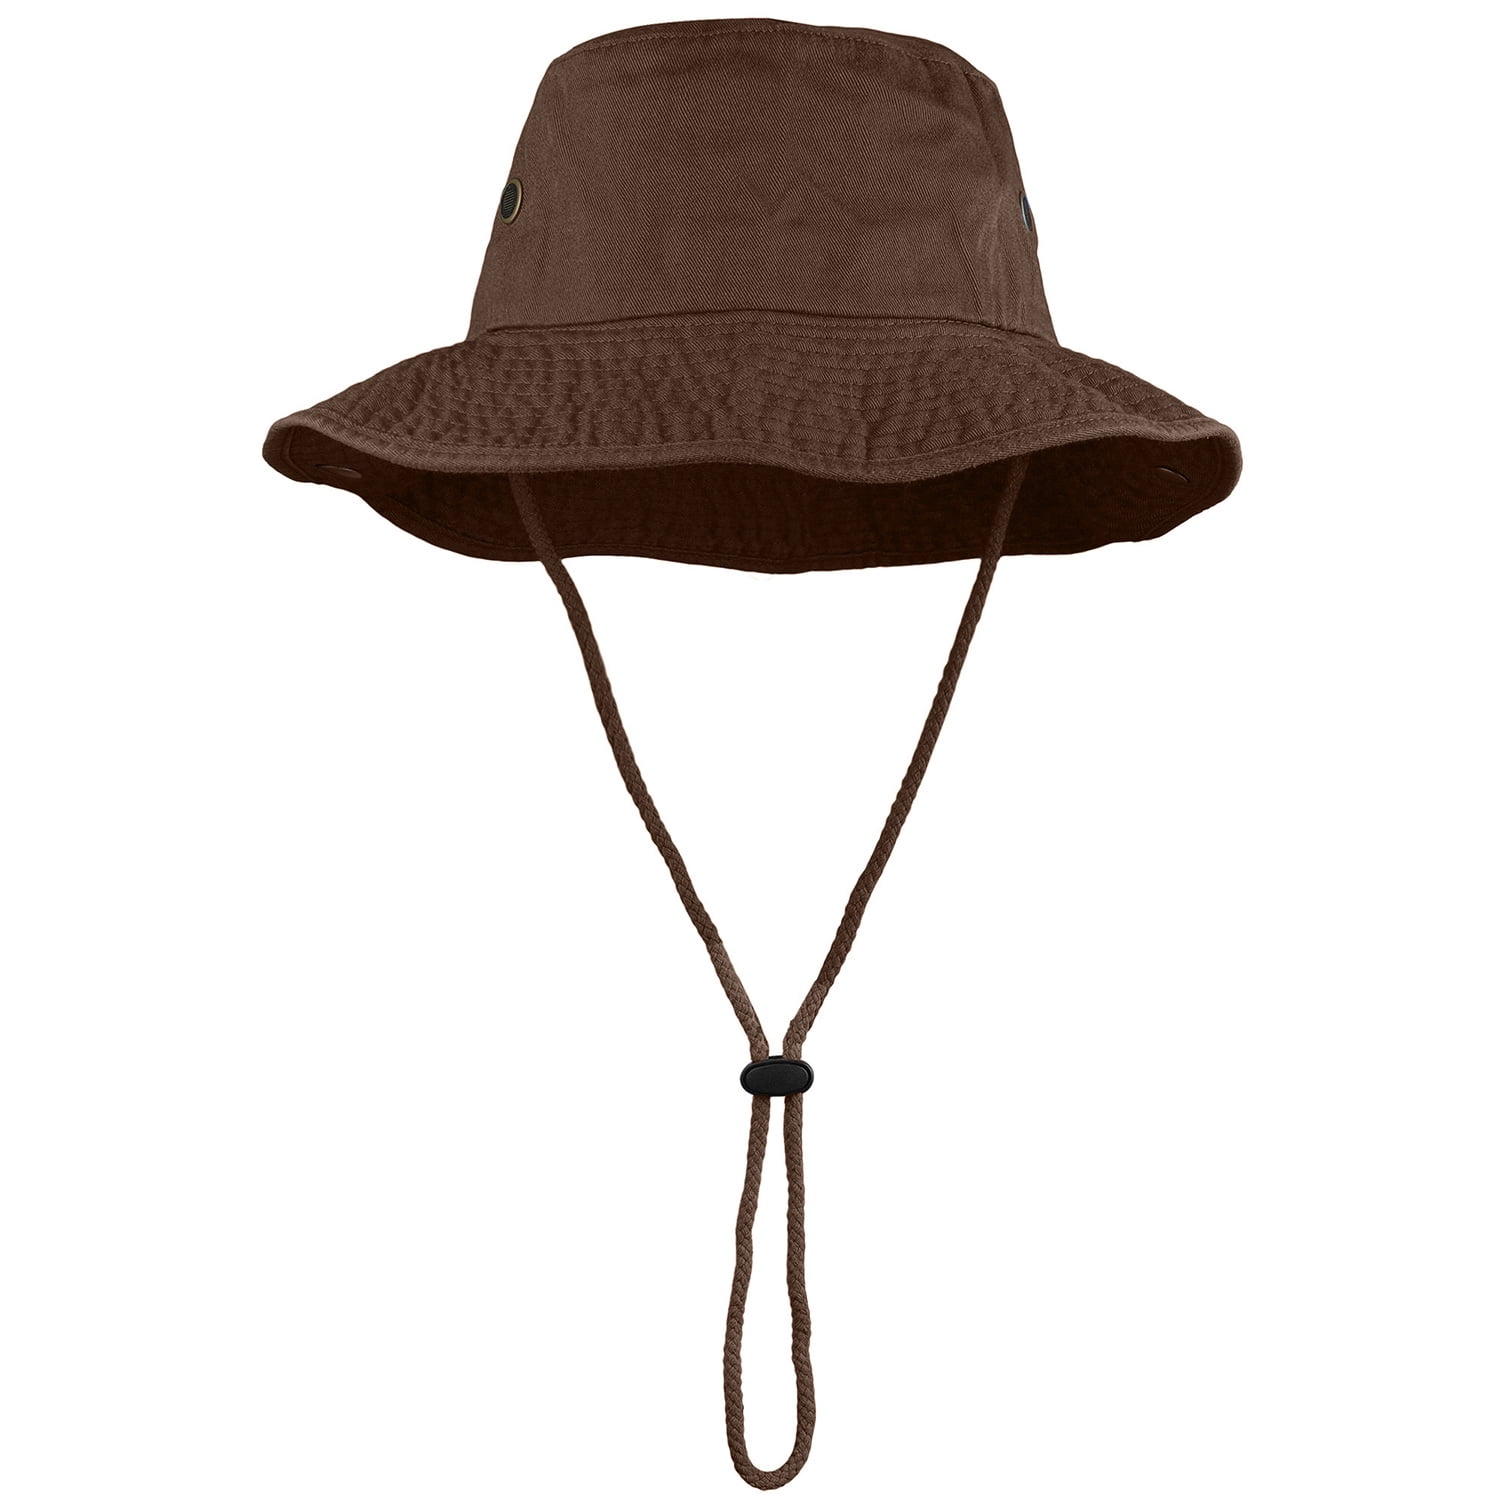 Nobrand Safari Hat Wide Brim: Pocket Outdoor Sun Hat Fishing Cap Bucket Hat With String Other